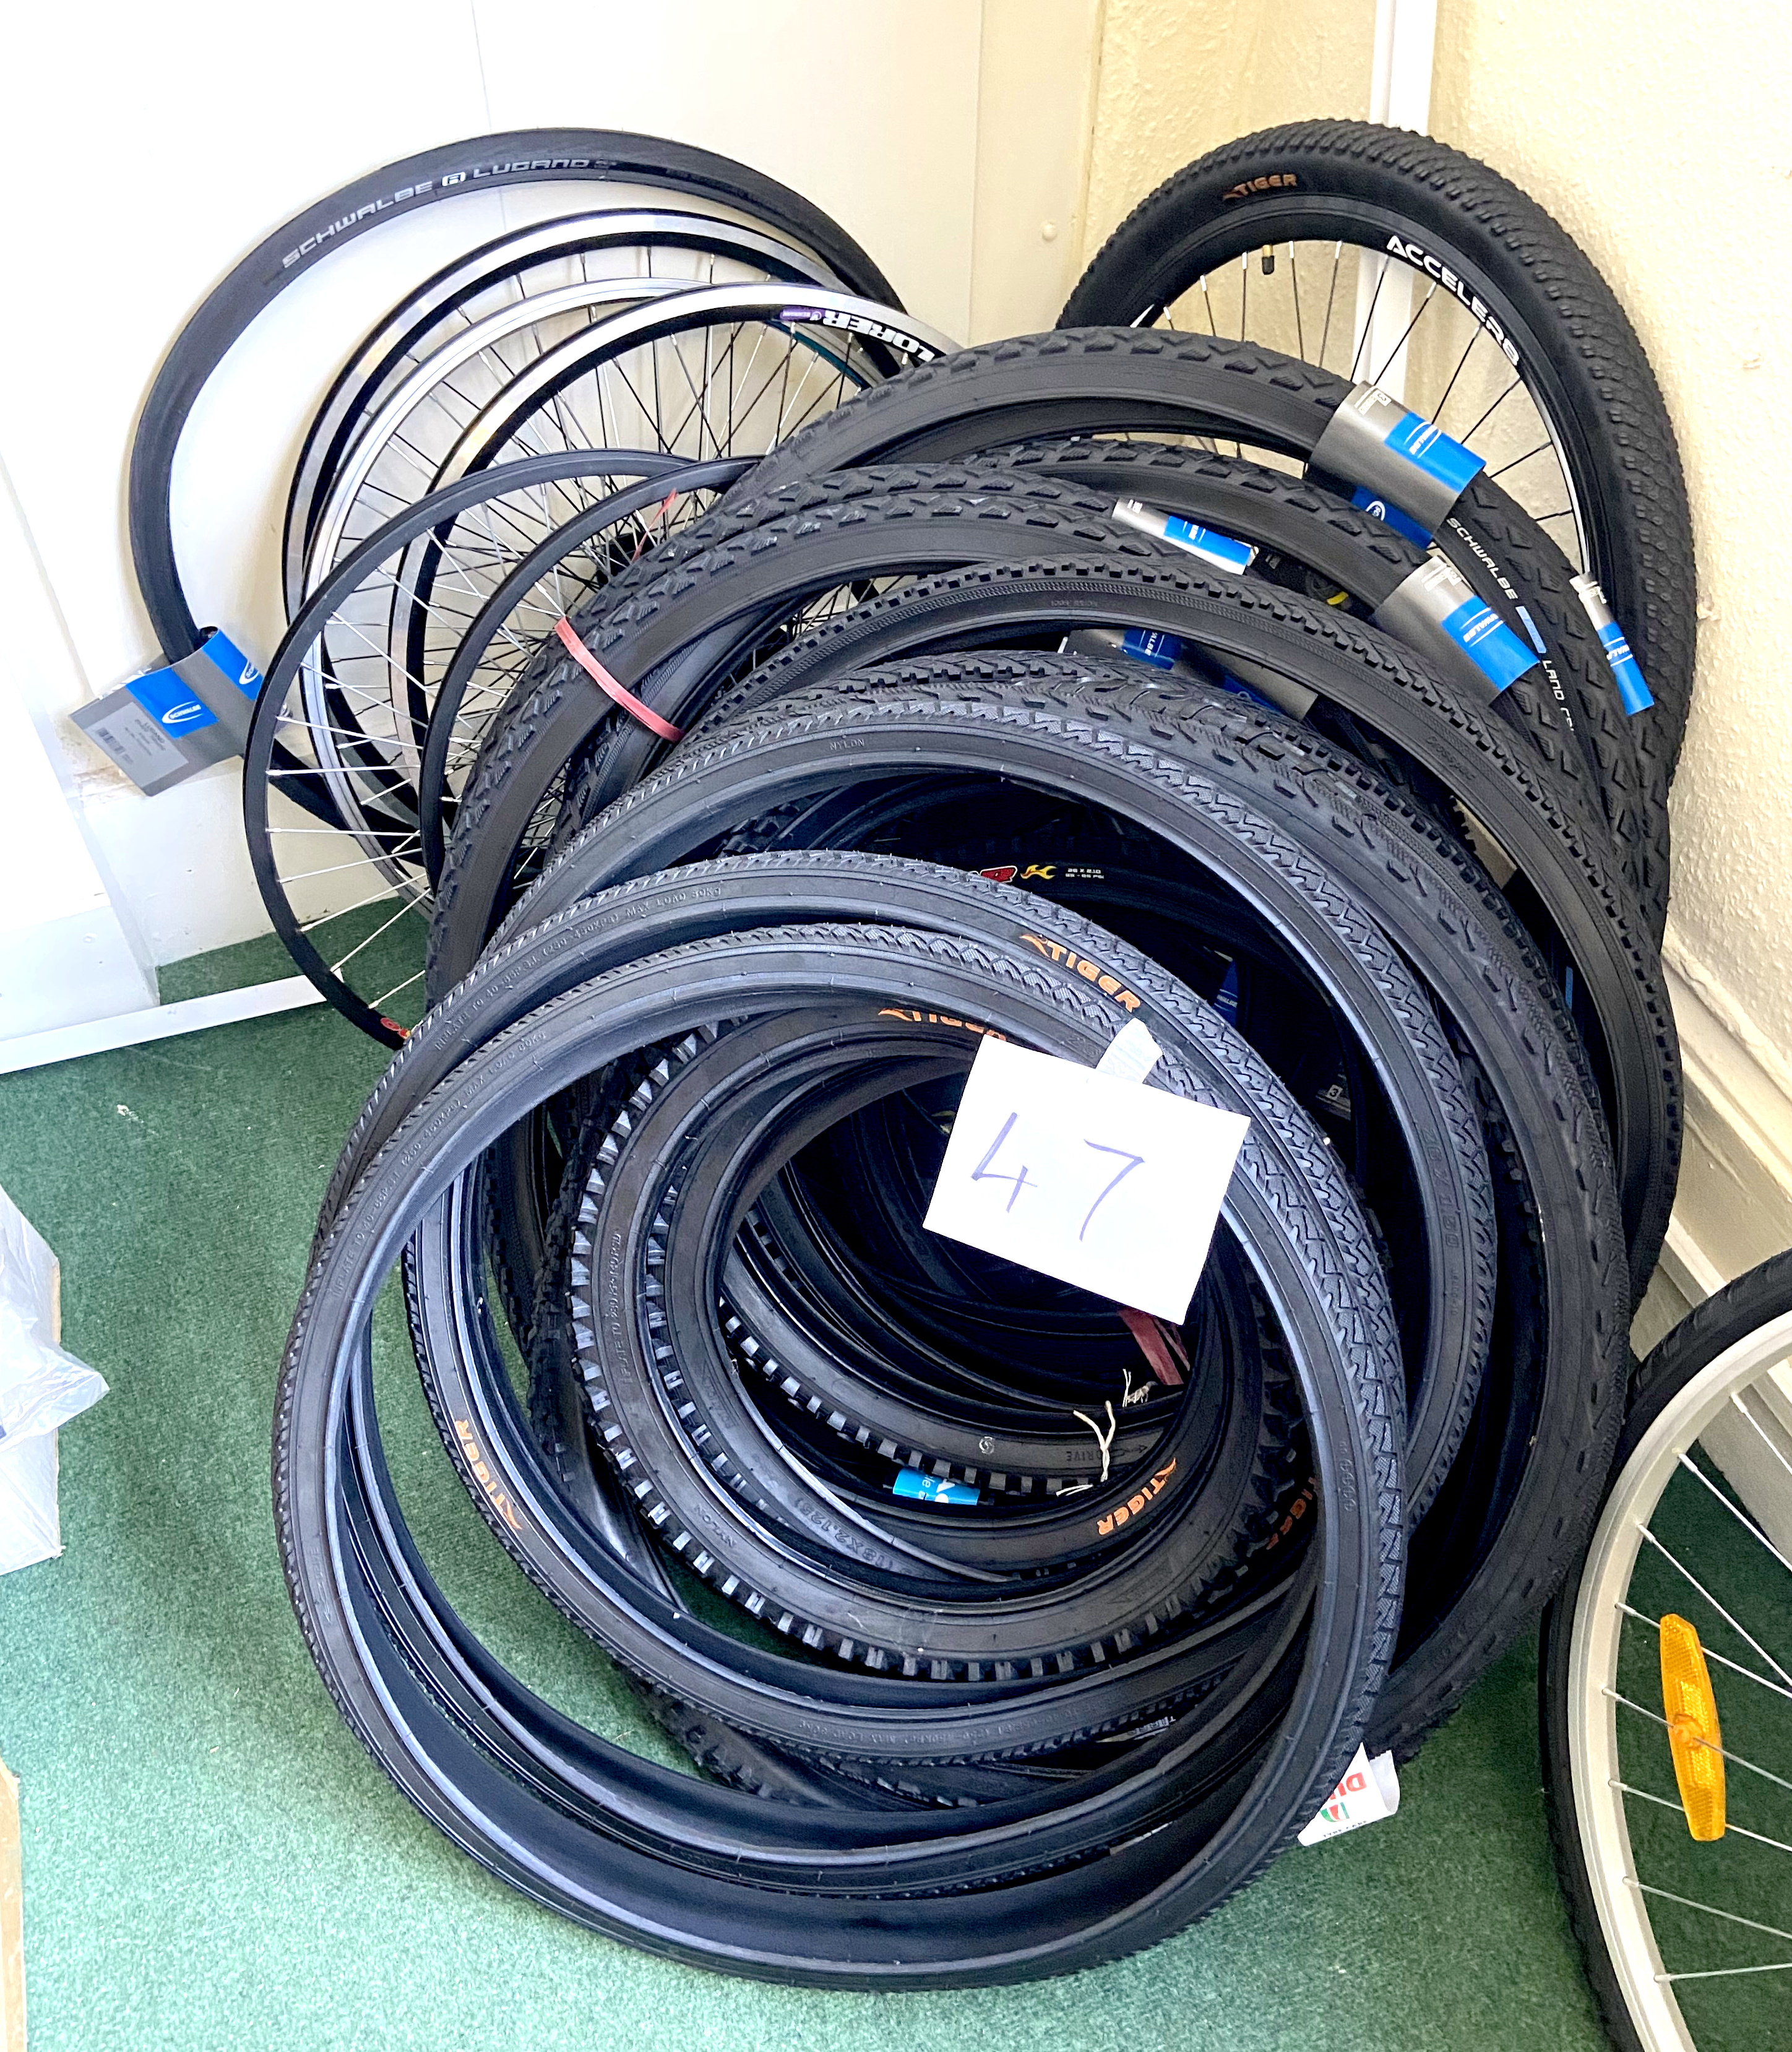 A larger group of bicycle tyres and wheels, including Tiger and Schwalbe.